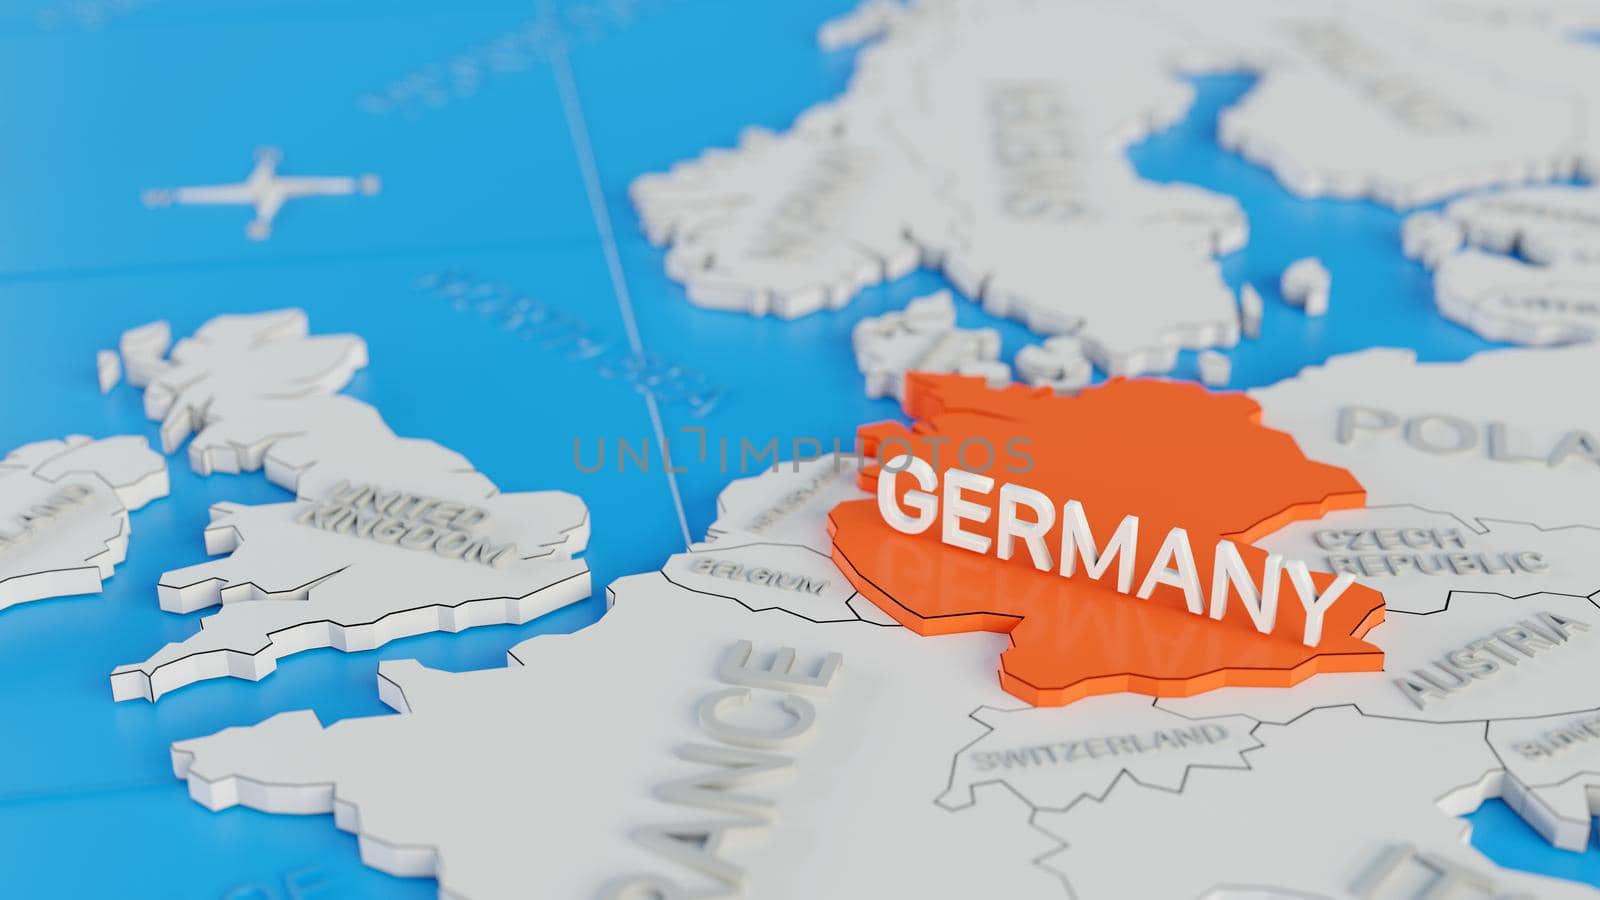 Germany highlighted on a white simplified 3D world map. Digital 3D render.